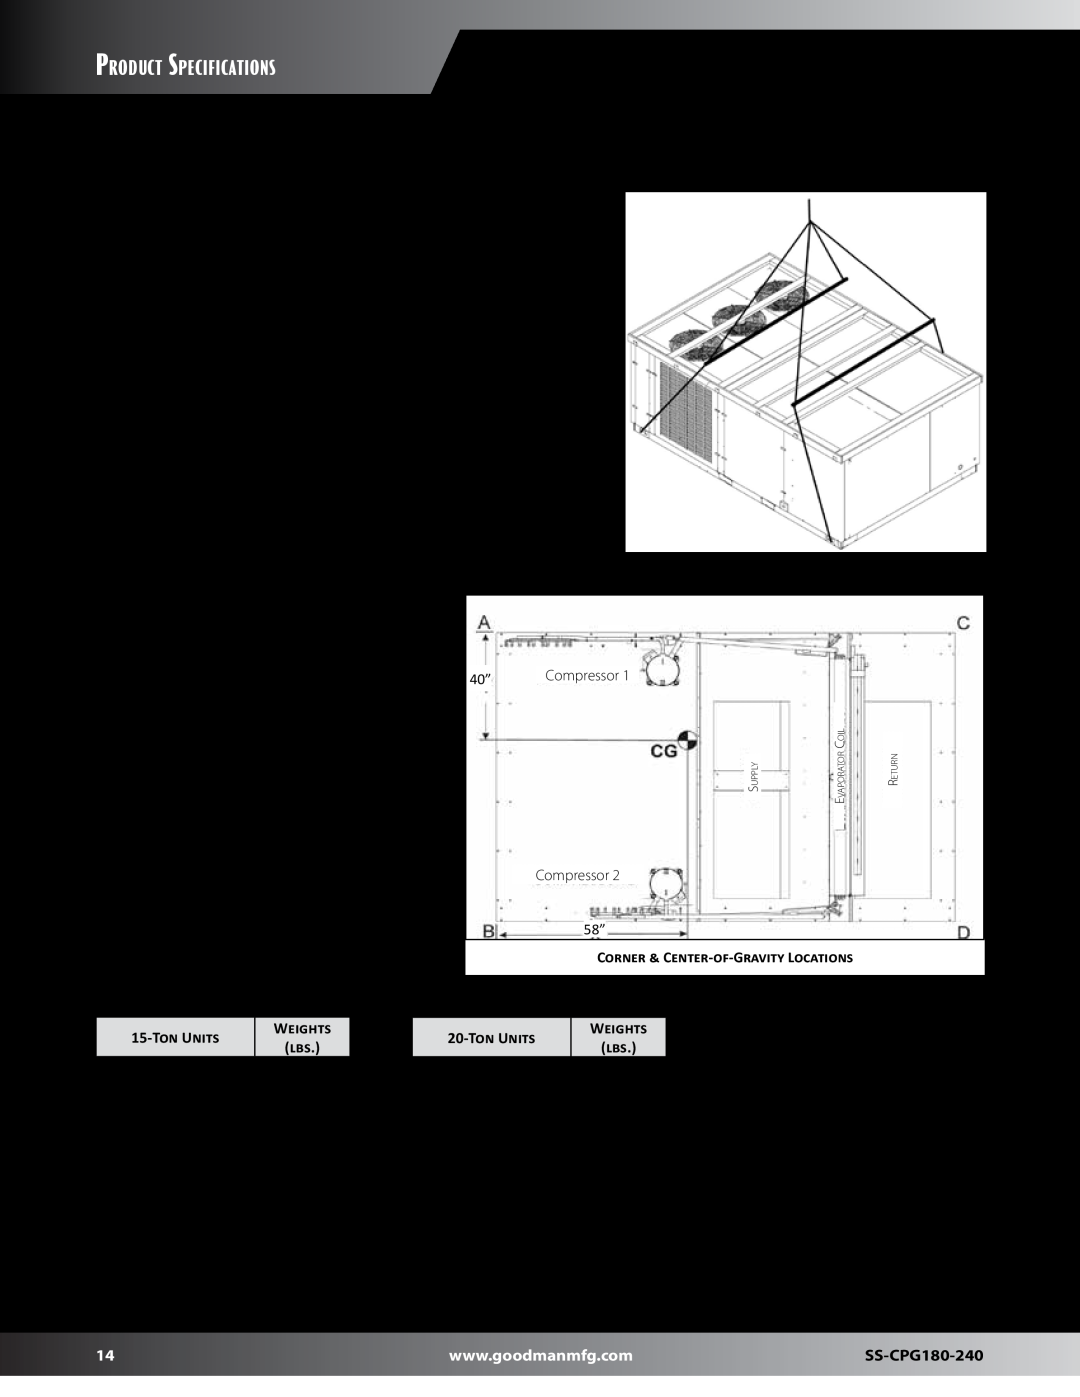 Goodman Mfg SS-CPG180-240 dimensions Roof Curb Installation - Rigging, Product Specifications 